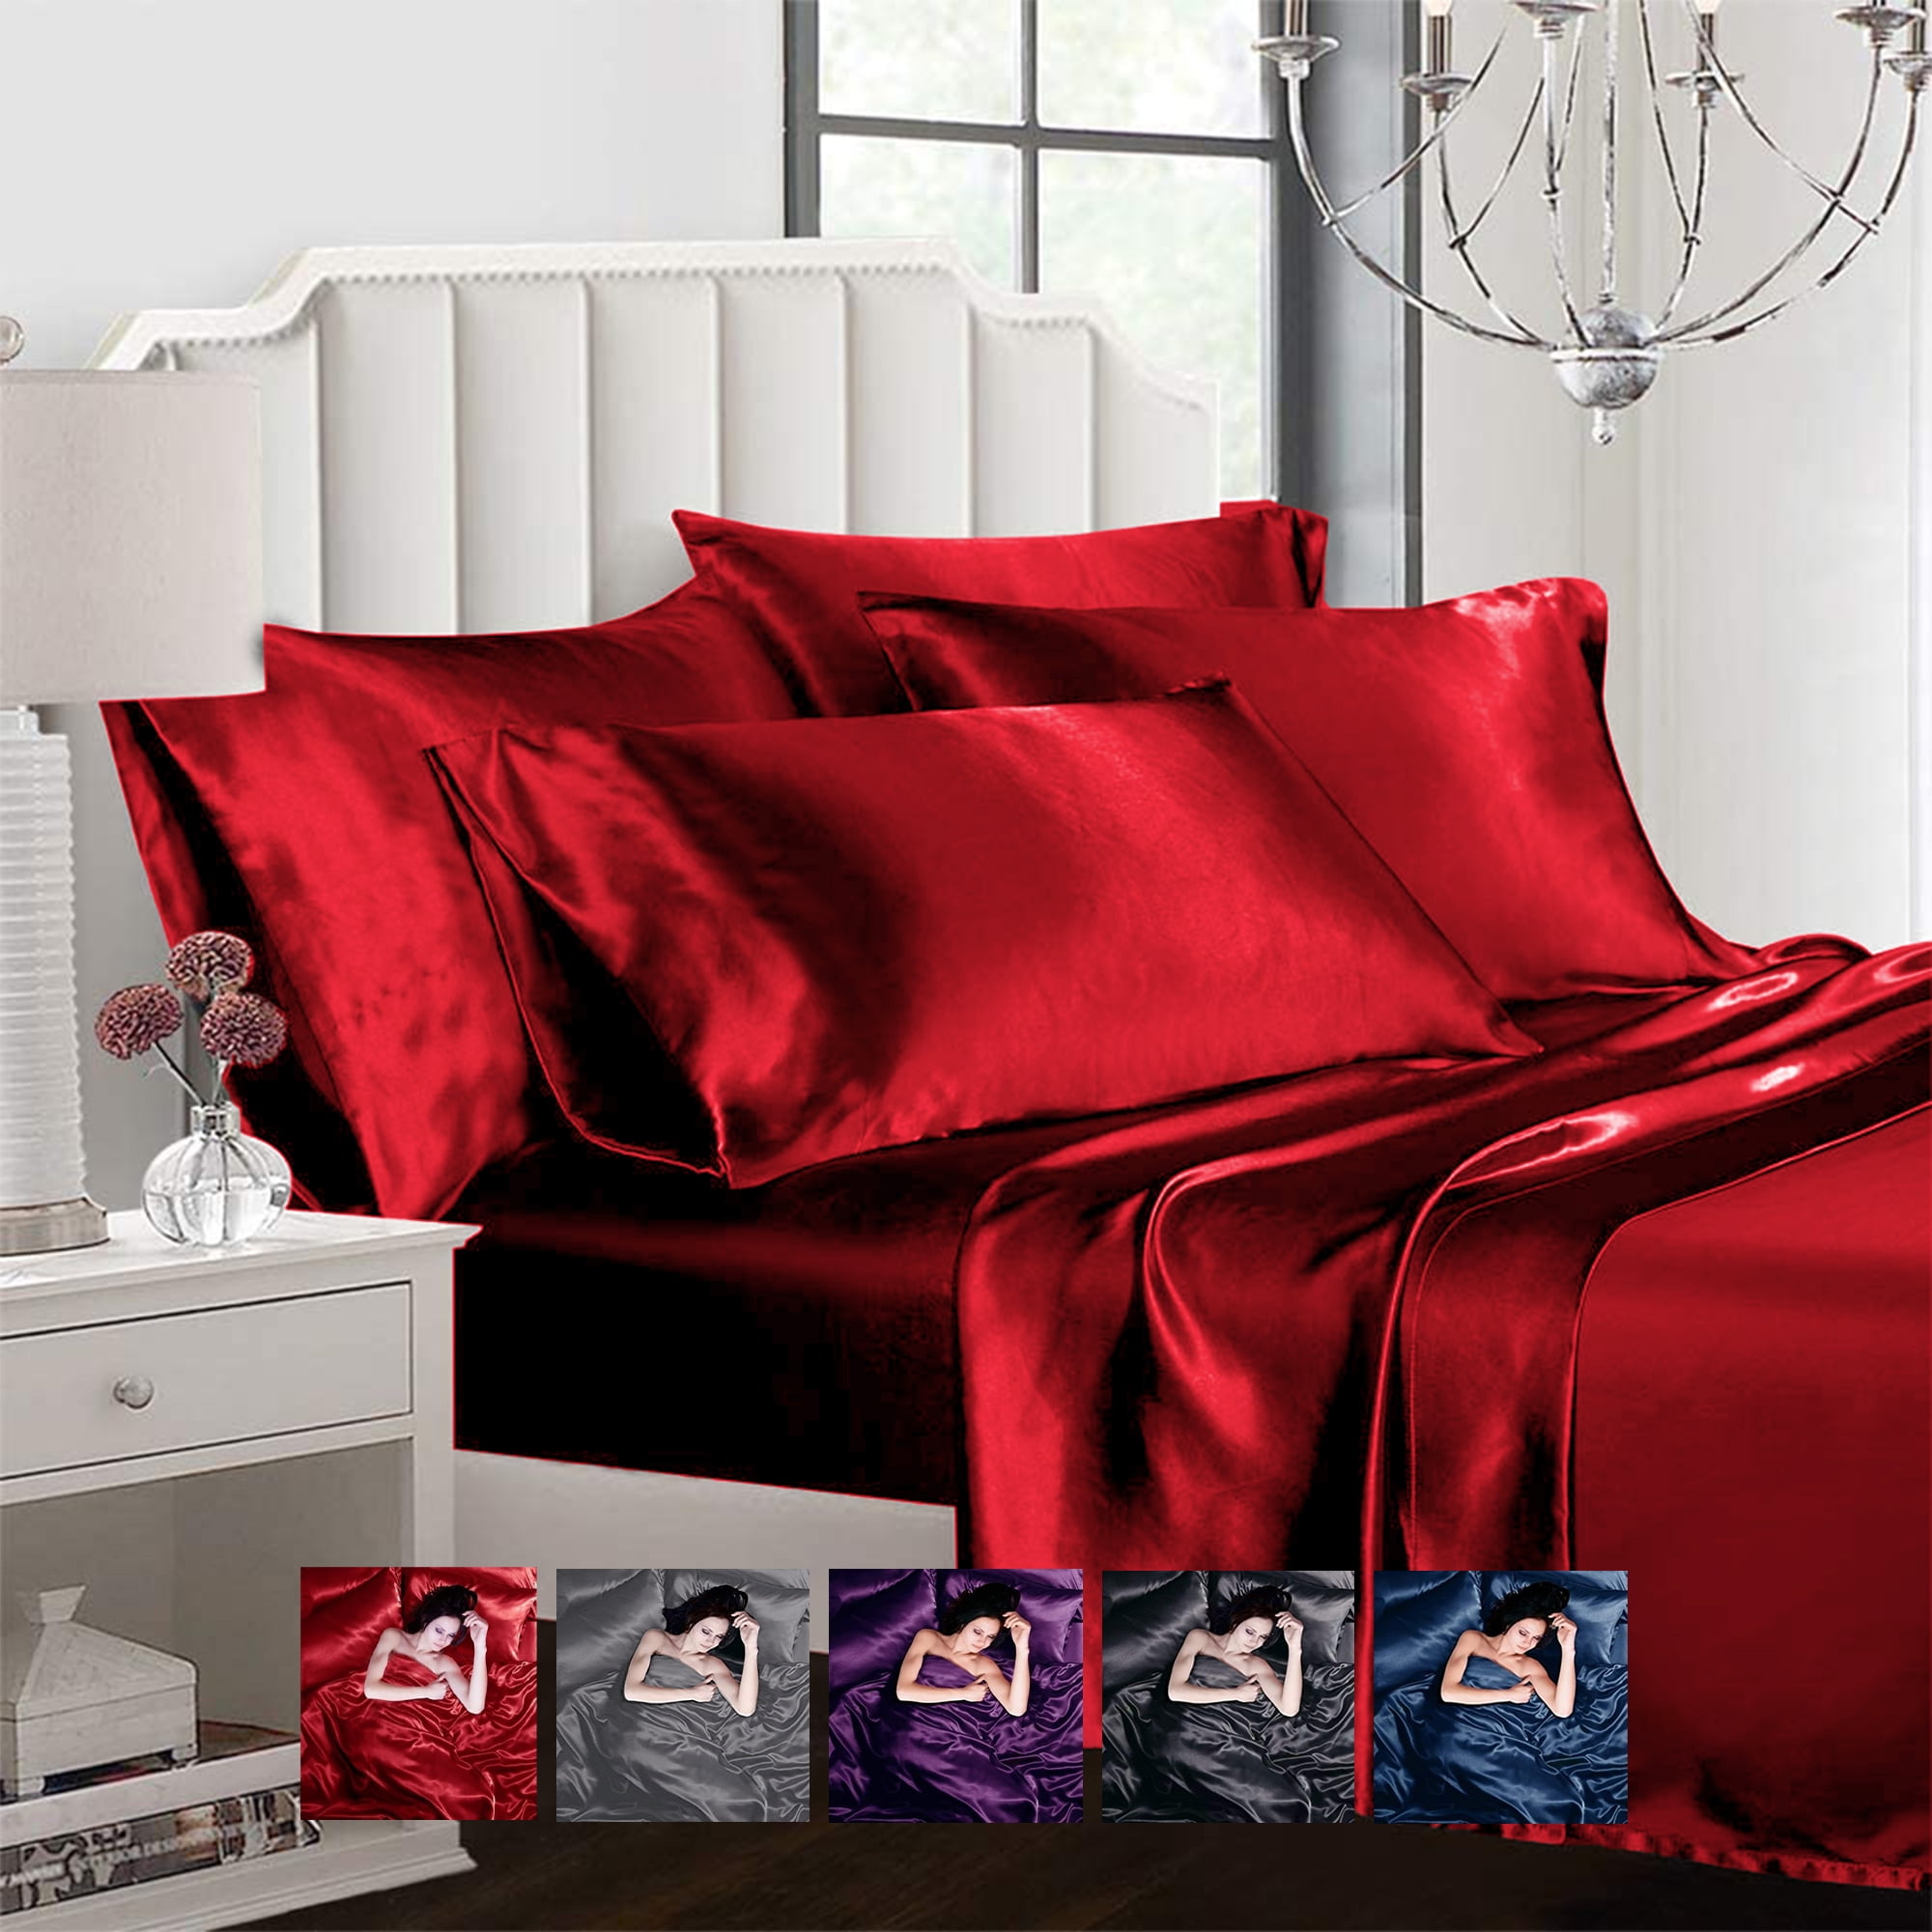 Y Bedding Set Queen Duvet Cover, What S The Size Of A Queen Duvet Cover